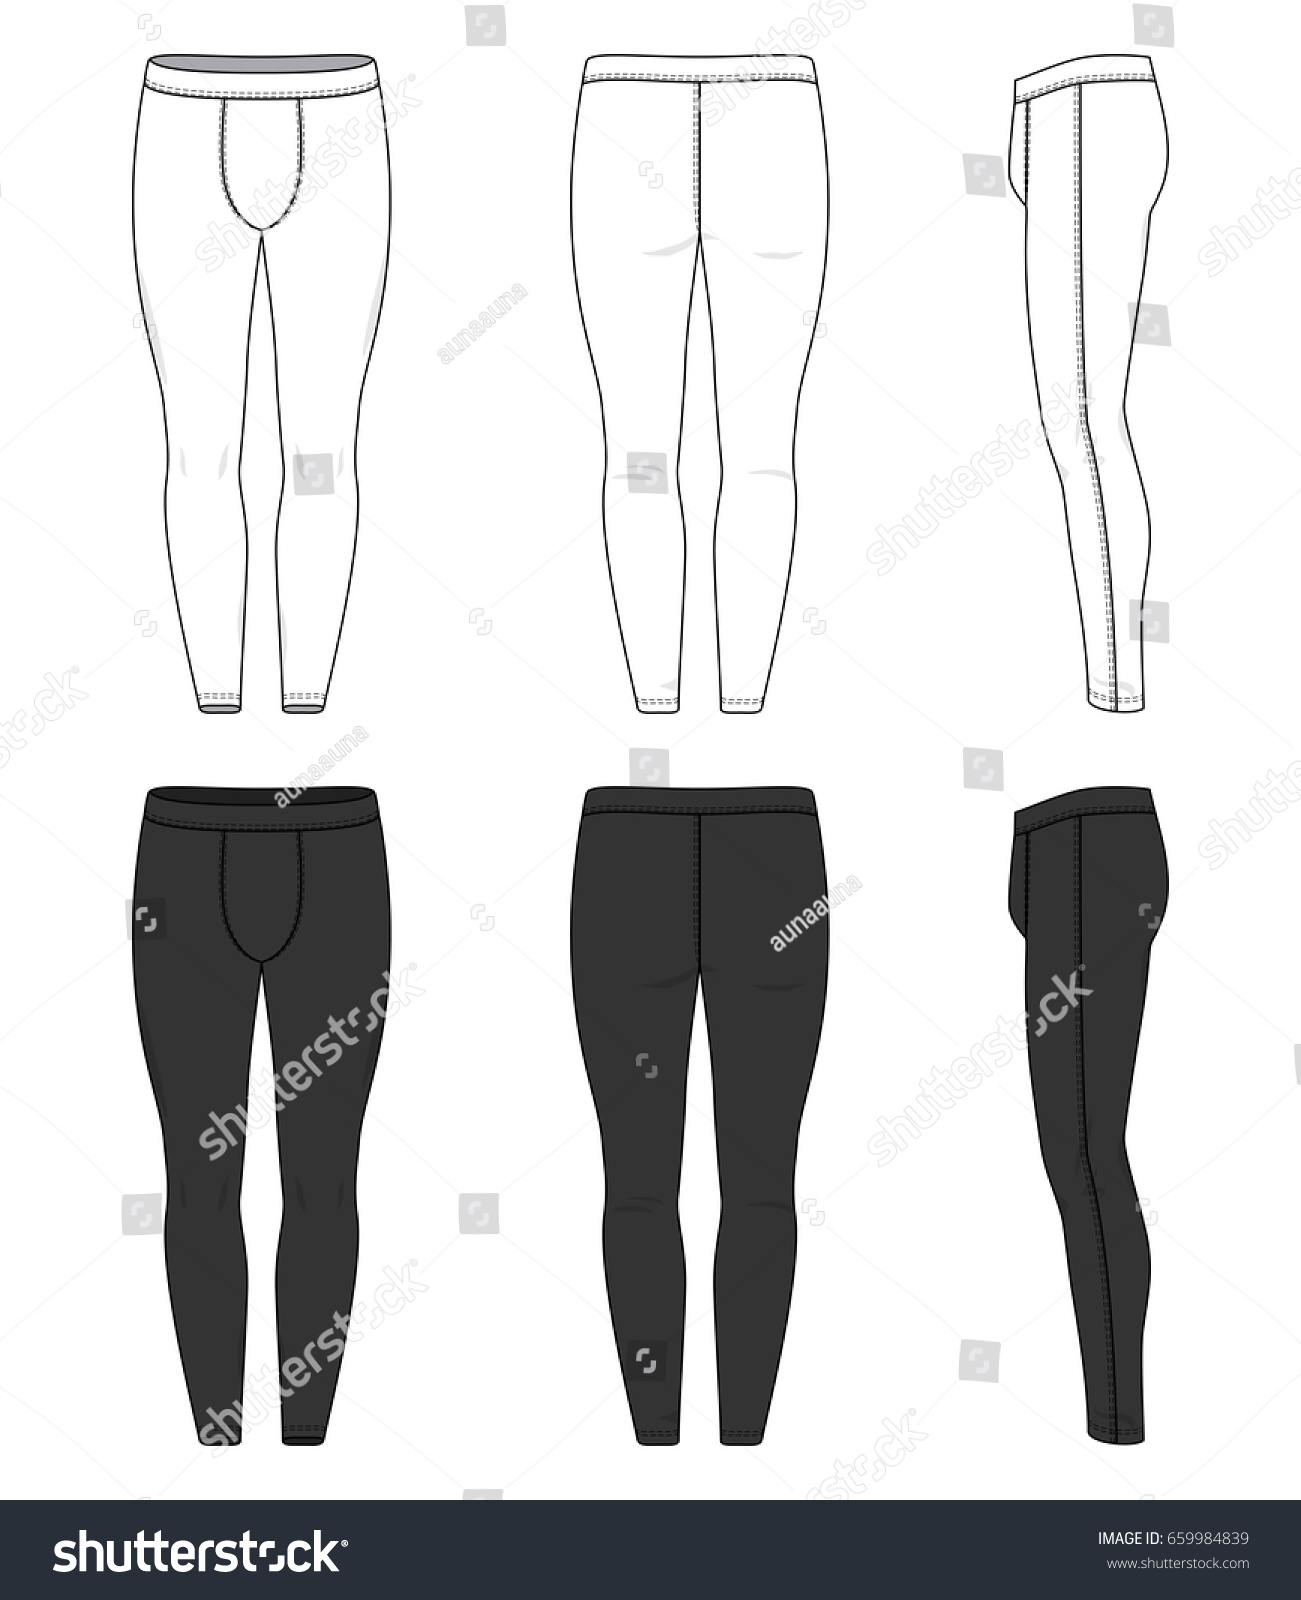 Download Compression Trousers Mockup ? Back Half Side View